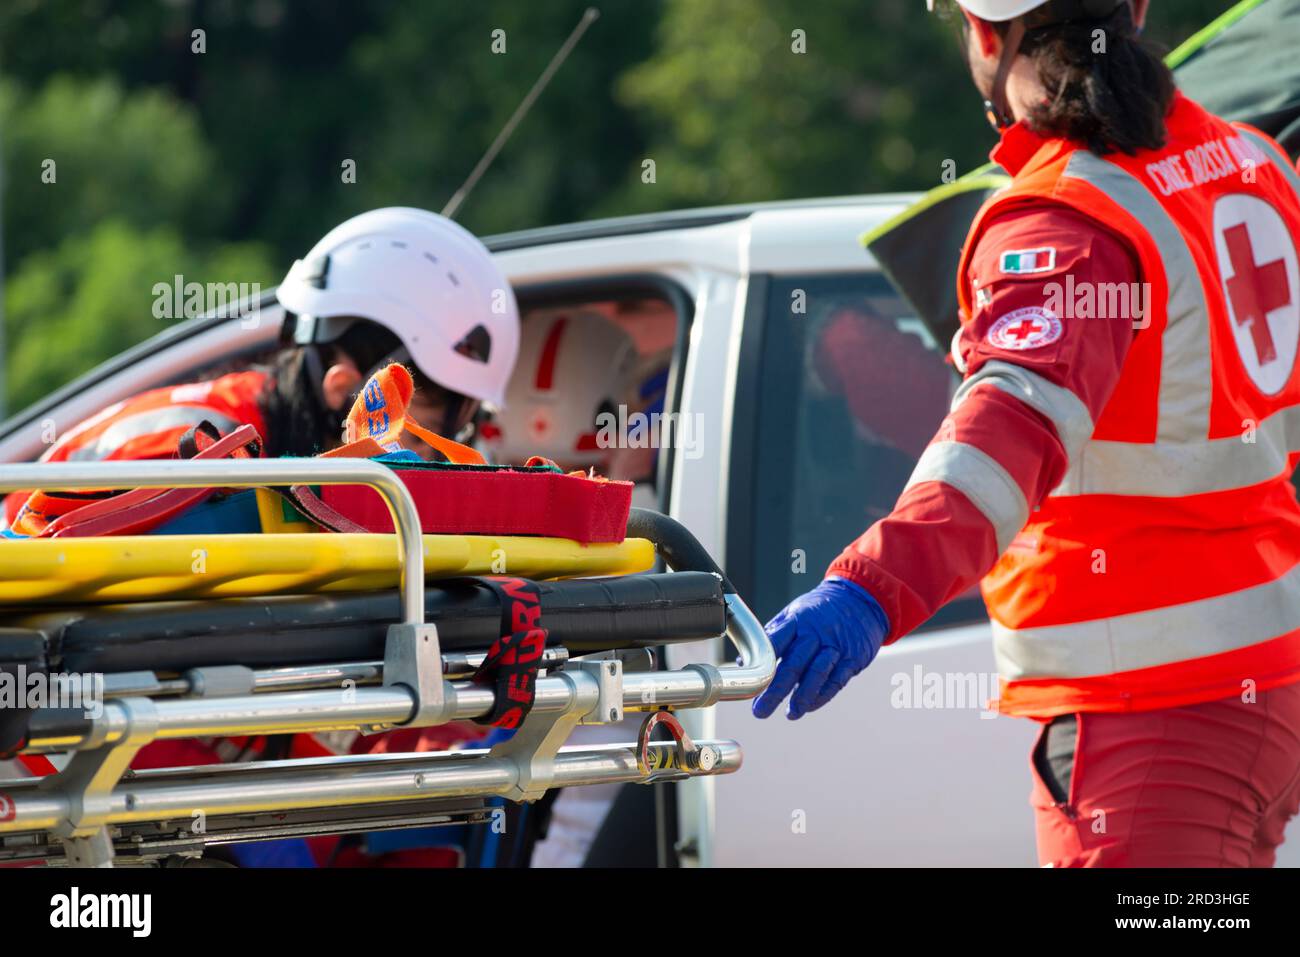 Italy, lombardy, Croce Rossa Italiana, Emergency Medical Services Accident Demonstration Stock Photo